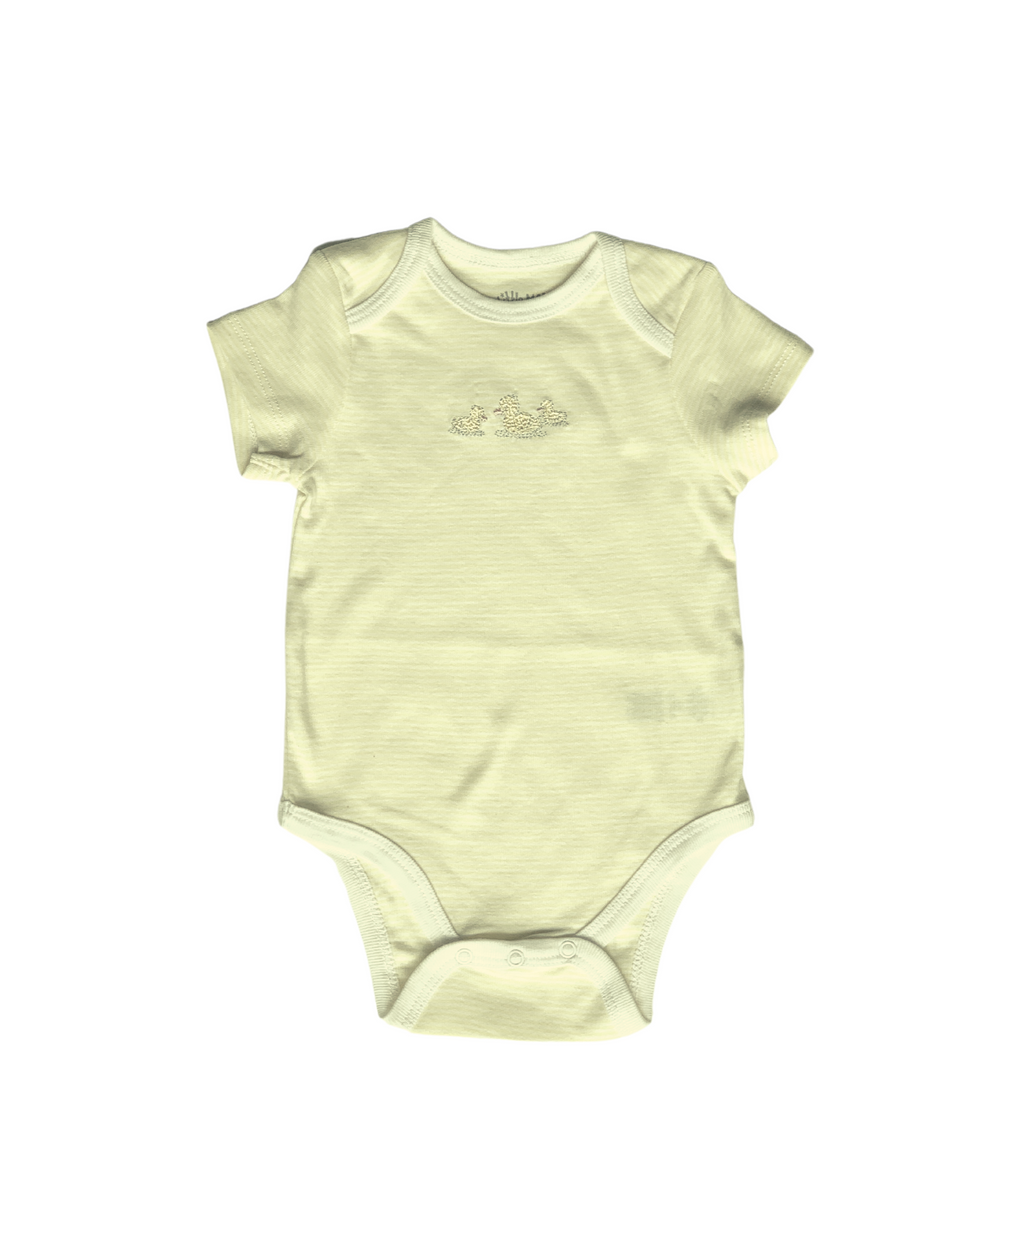 Our Gift To You (with purchase) Ducks Bodysuit - Little Me